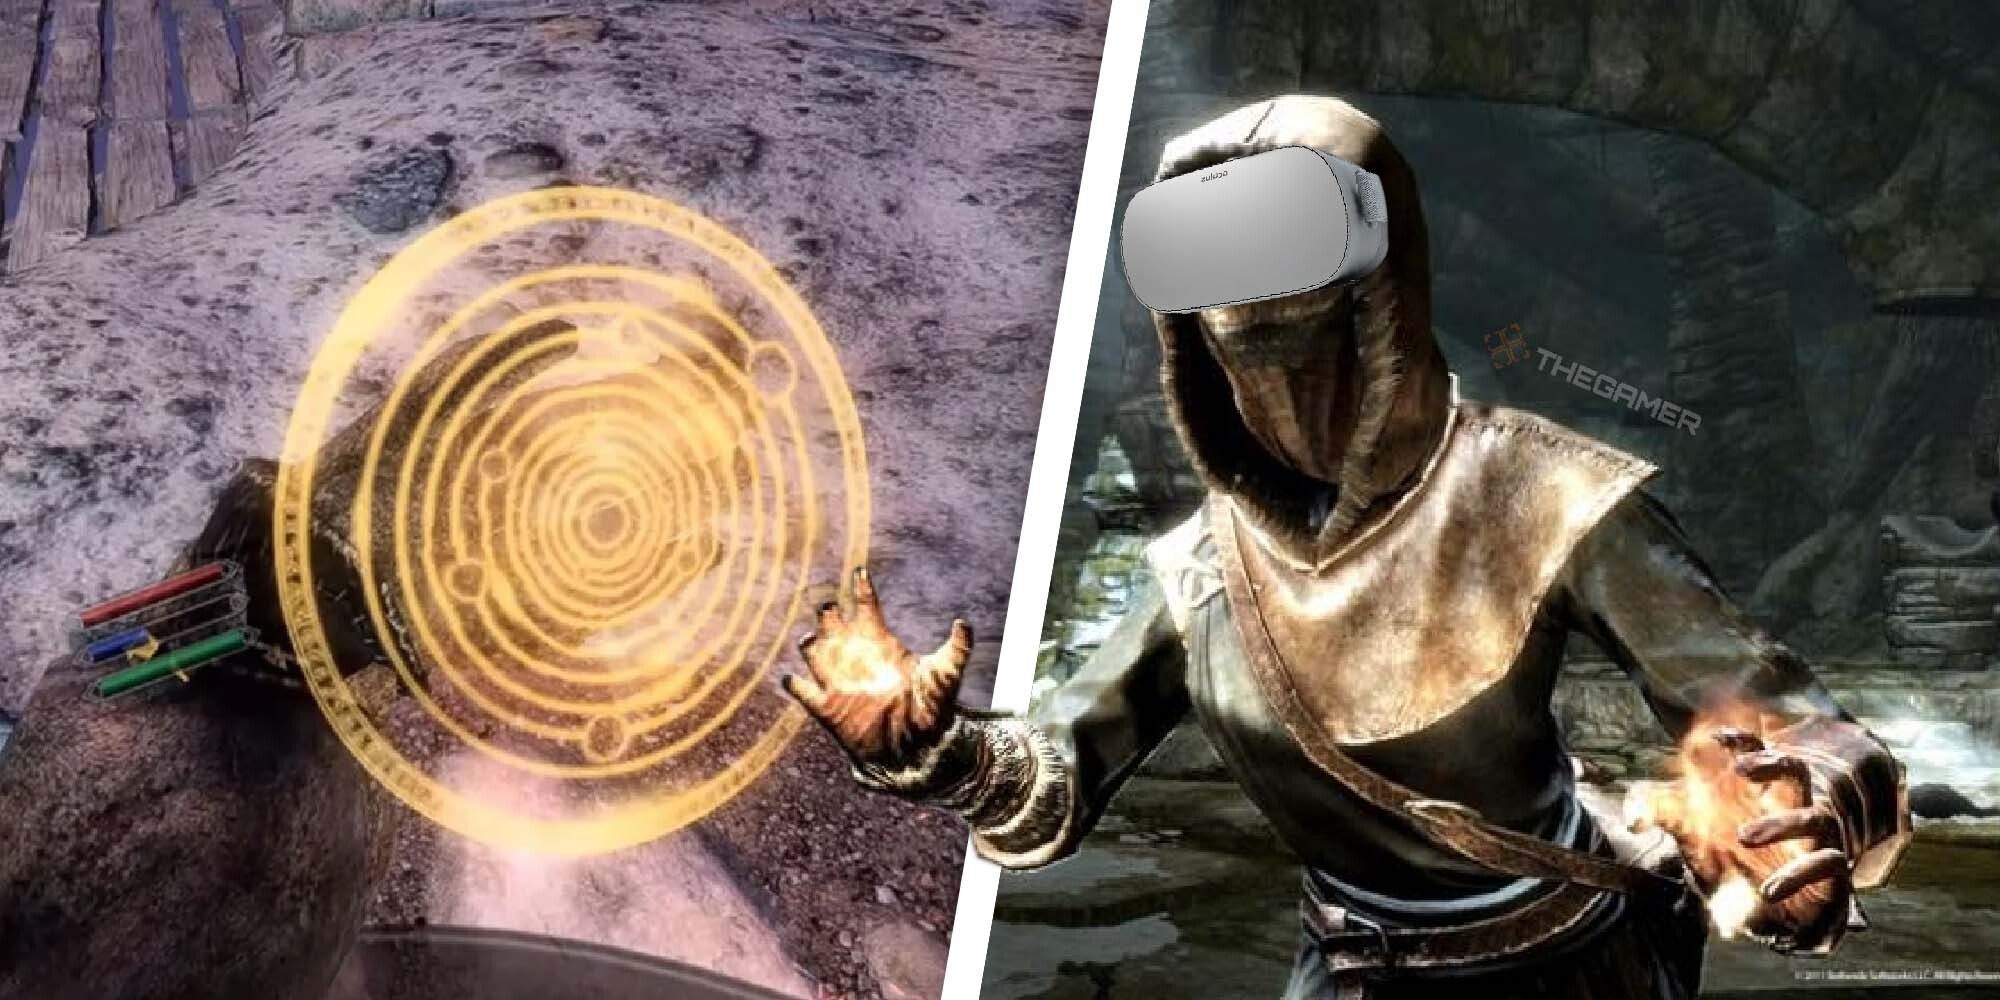 Skyrim Brain Magic - a split image of the discs from the RVM mod and an argonian mage in a VR headset